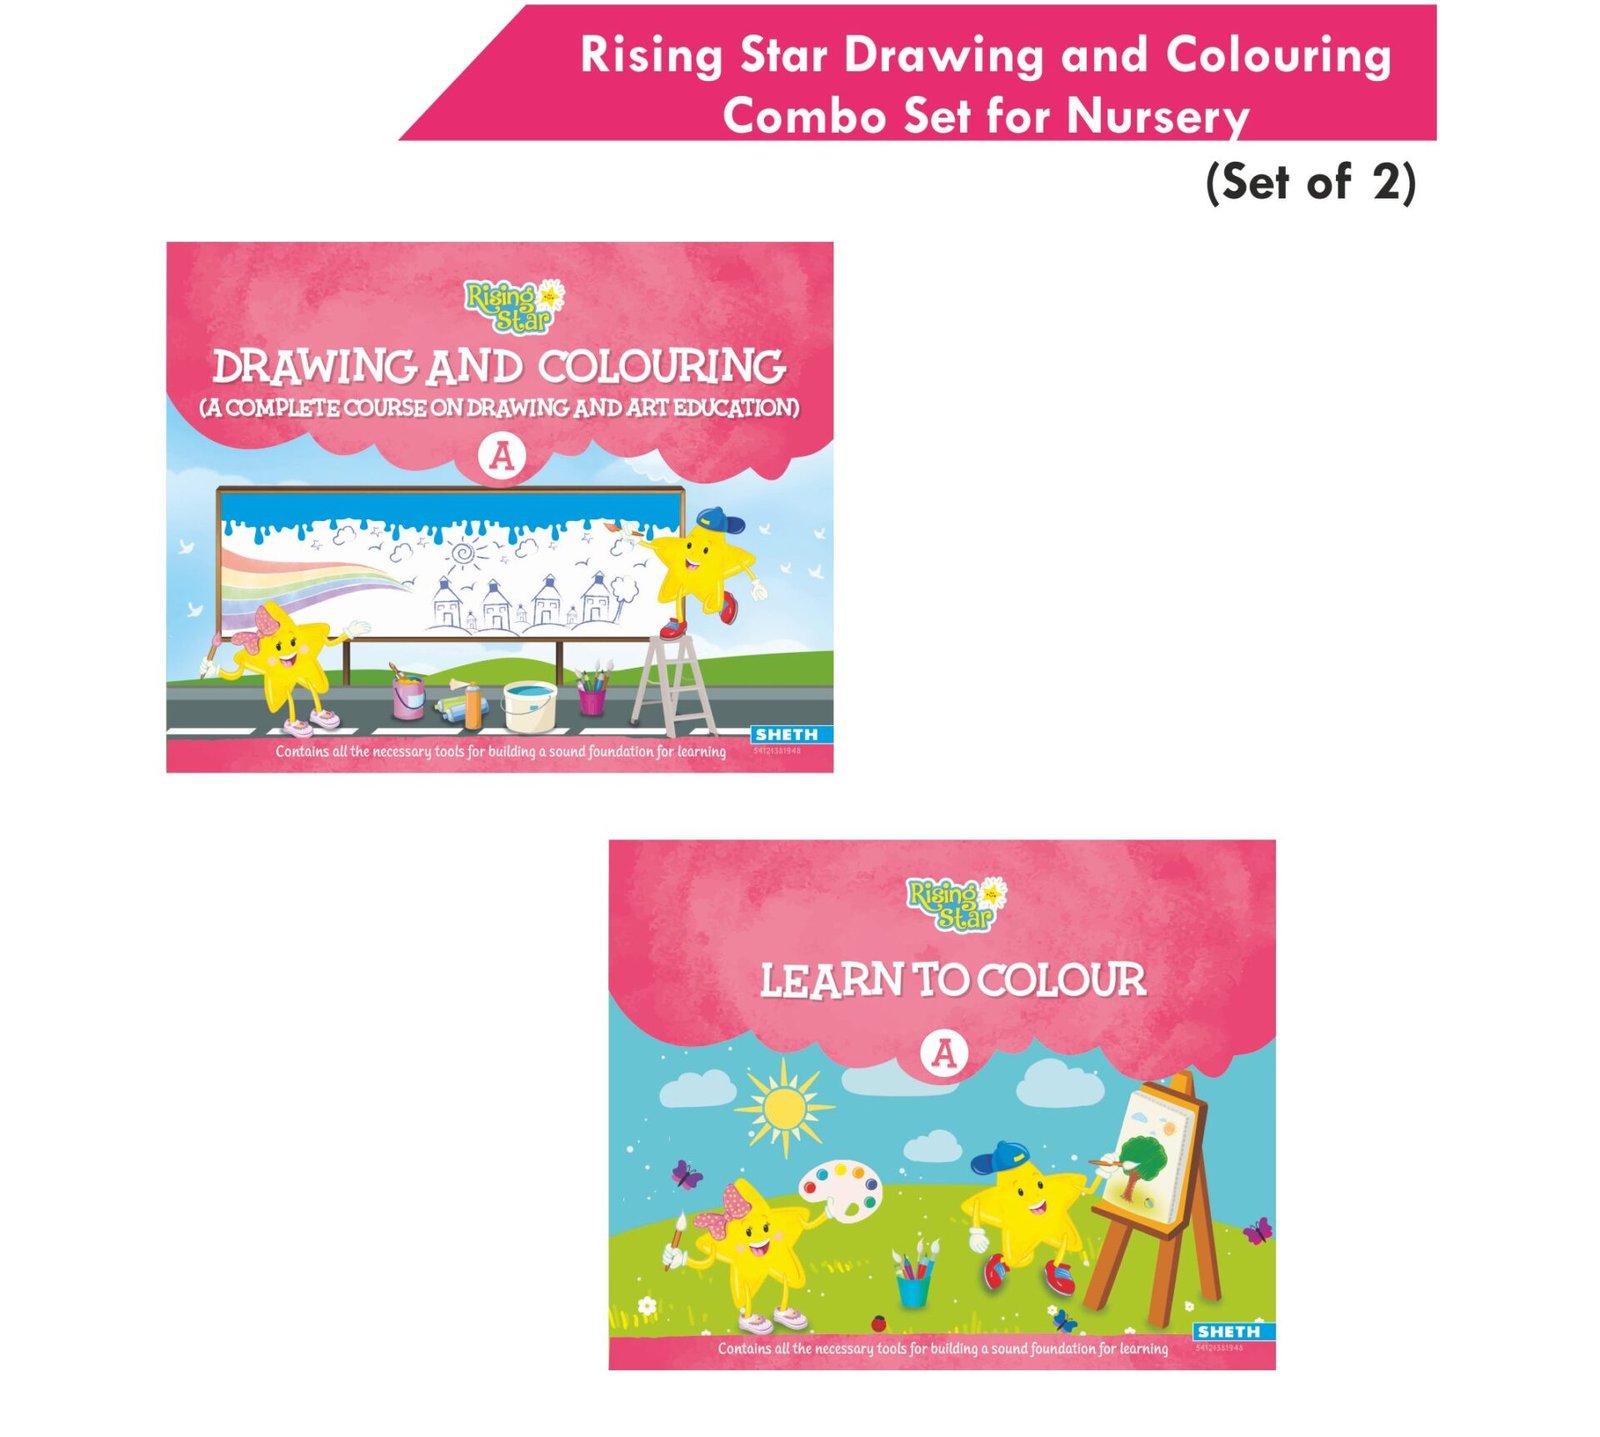 Rising Star Drawing and Colouring Combo Set for Nursery Set of 2 1